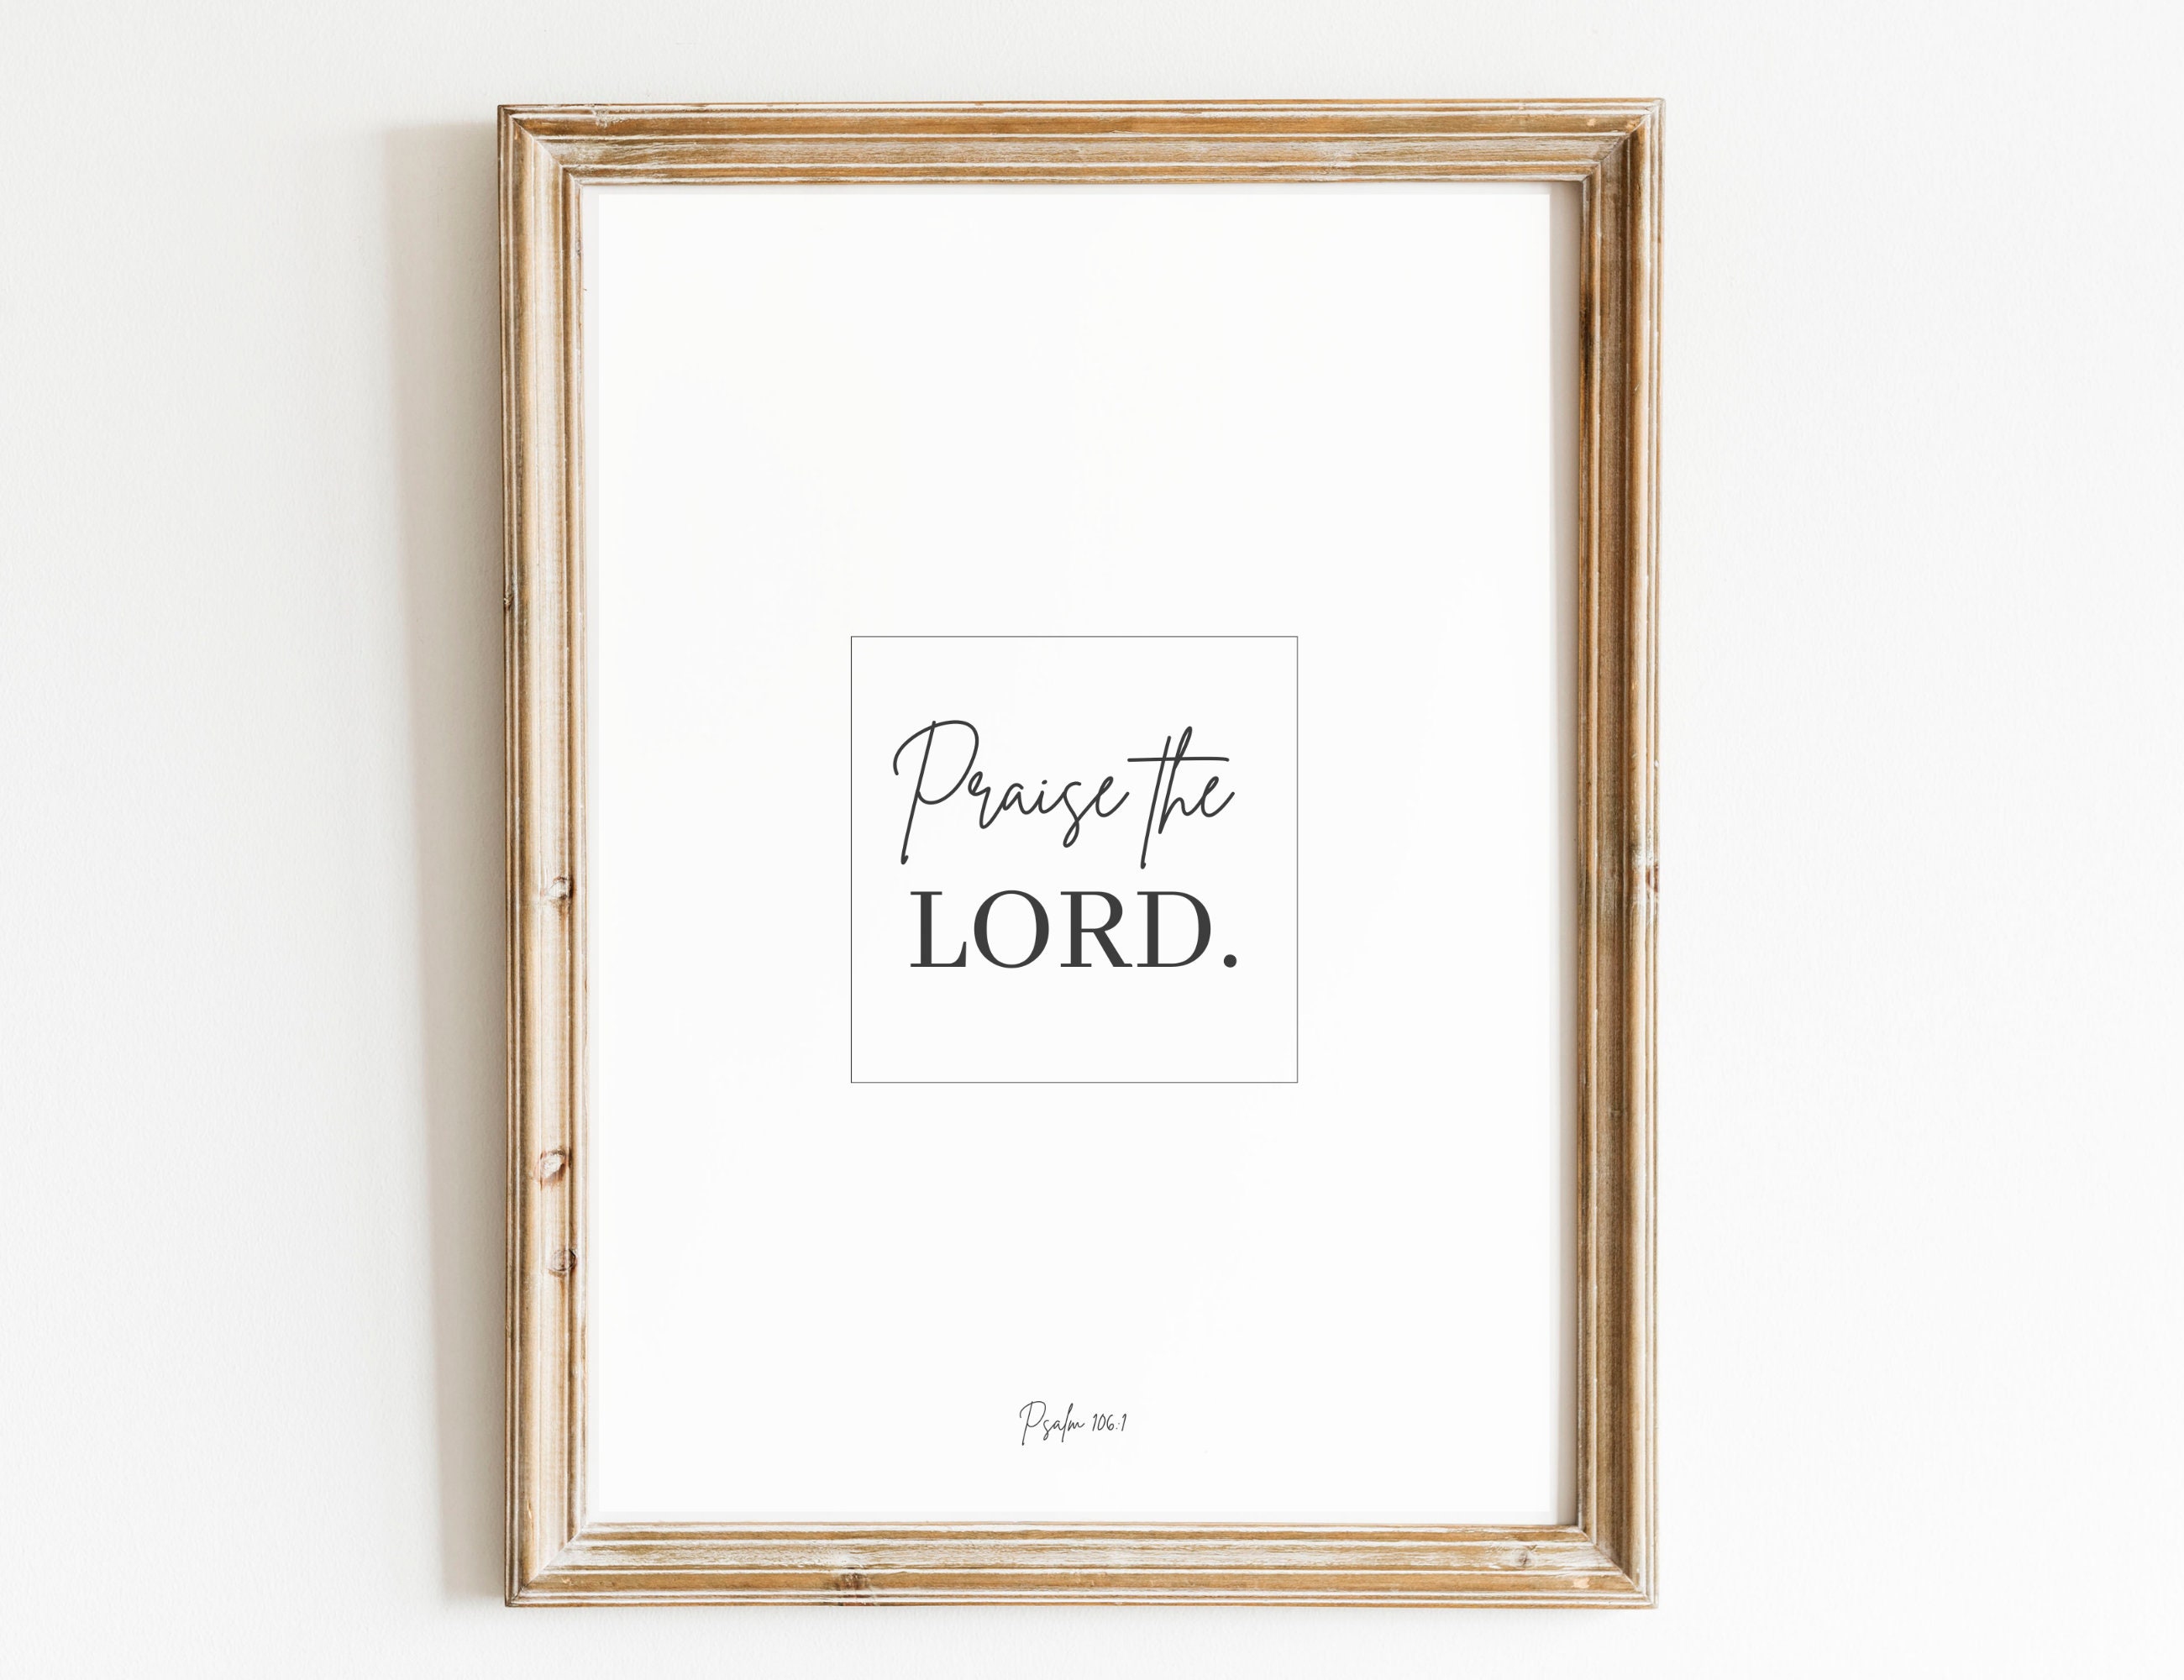 Psalm 13:6 Stencil by StudioR12 | I Will Sing to The Lord | Craft Cursive Christian Hymn Gift | DIY Bible Verse Song Lyrics Faith | Paint Wood Sign